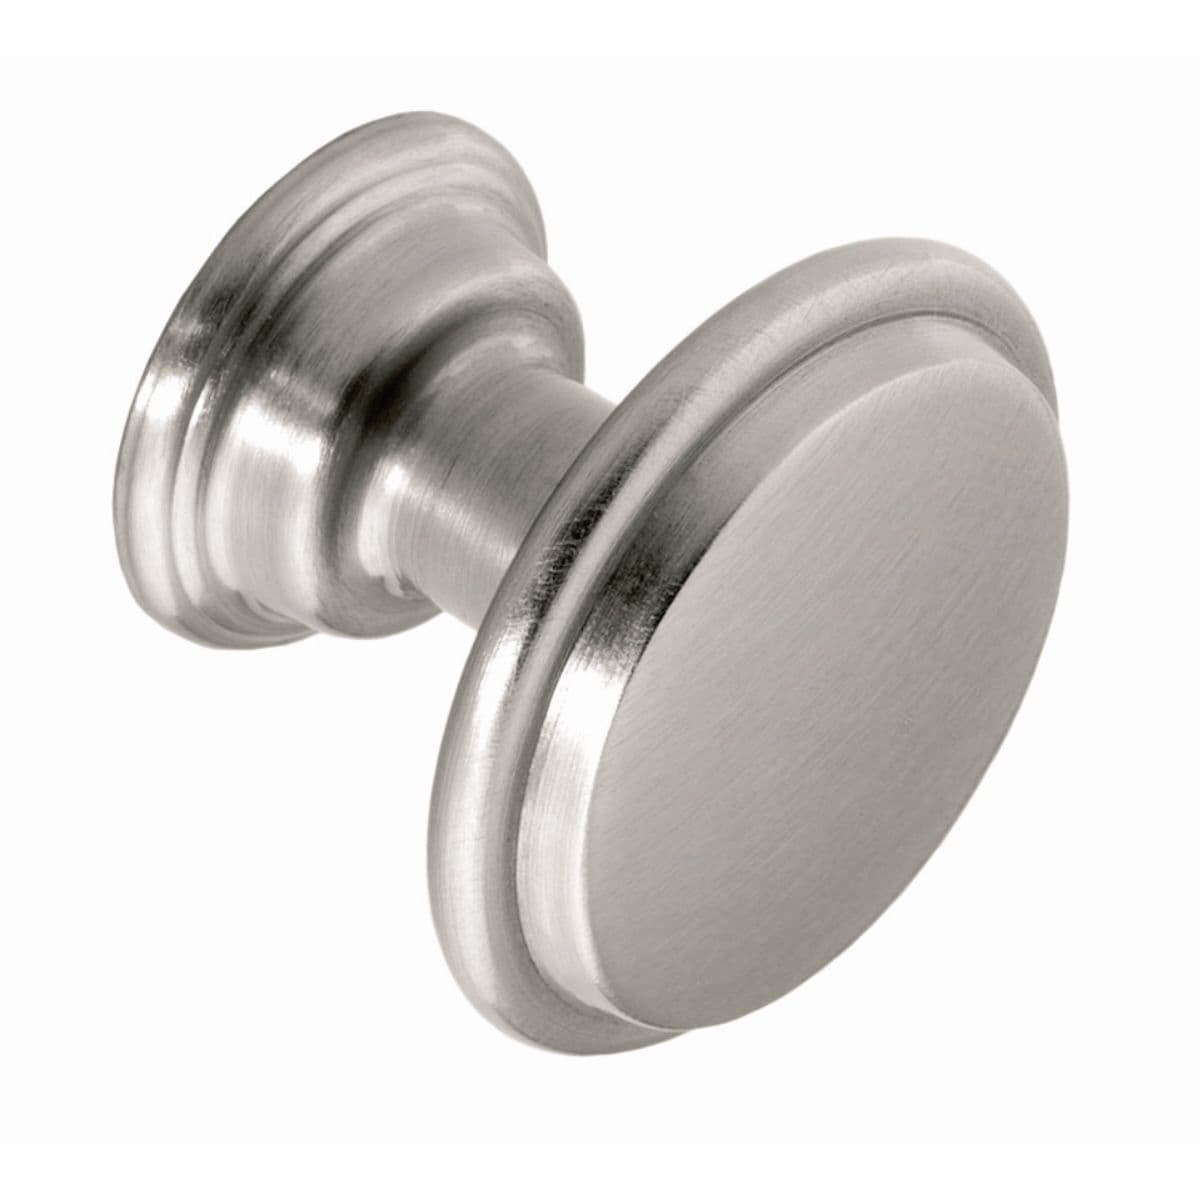 PELTON KNOB Cupboard Handle - 30mm dia - POLISHED STAINLESS STEEL EFFECT finish (PWS 6432SS)